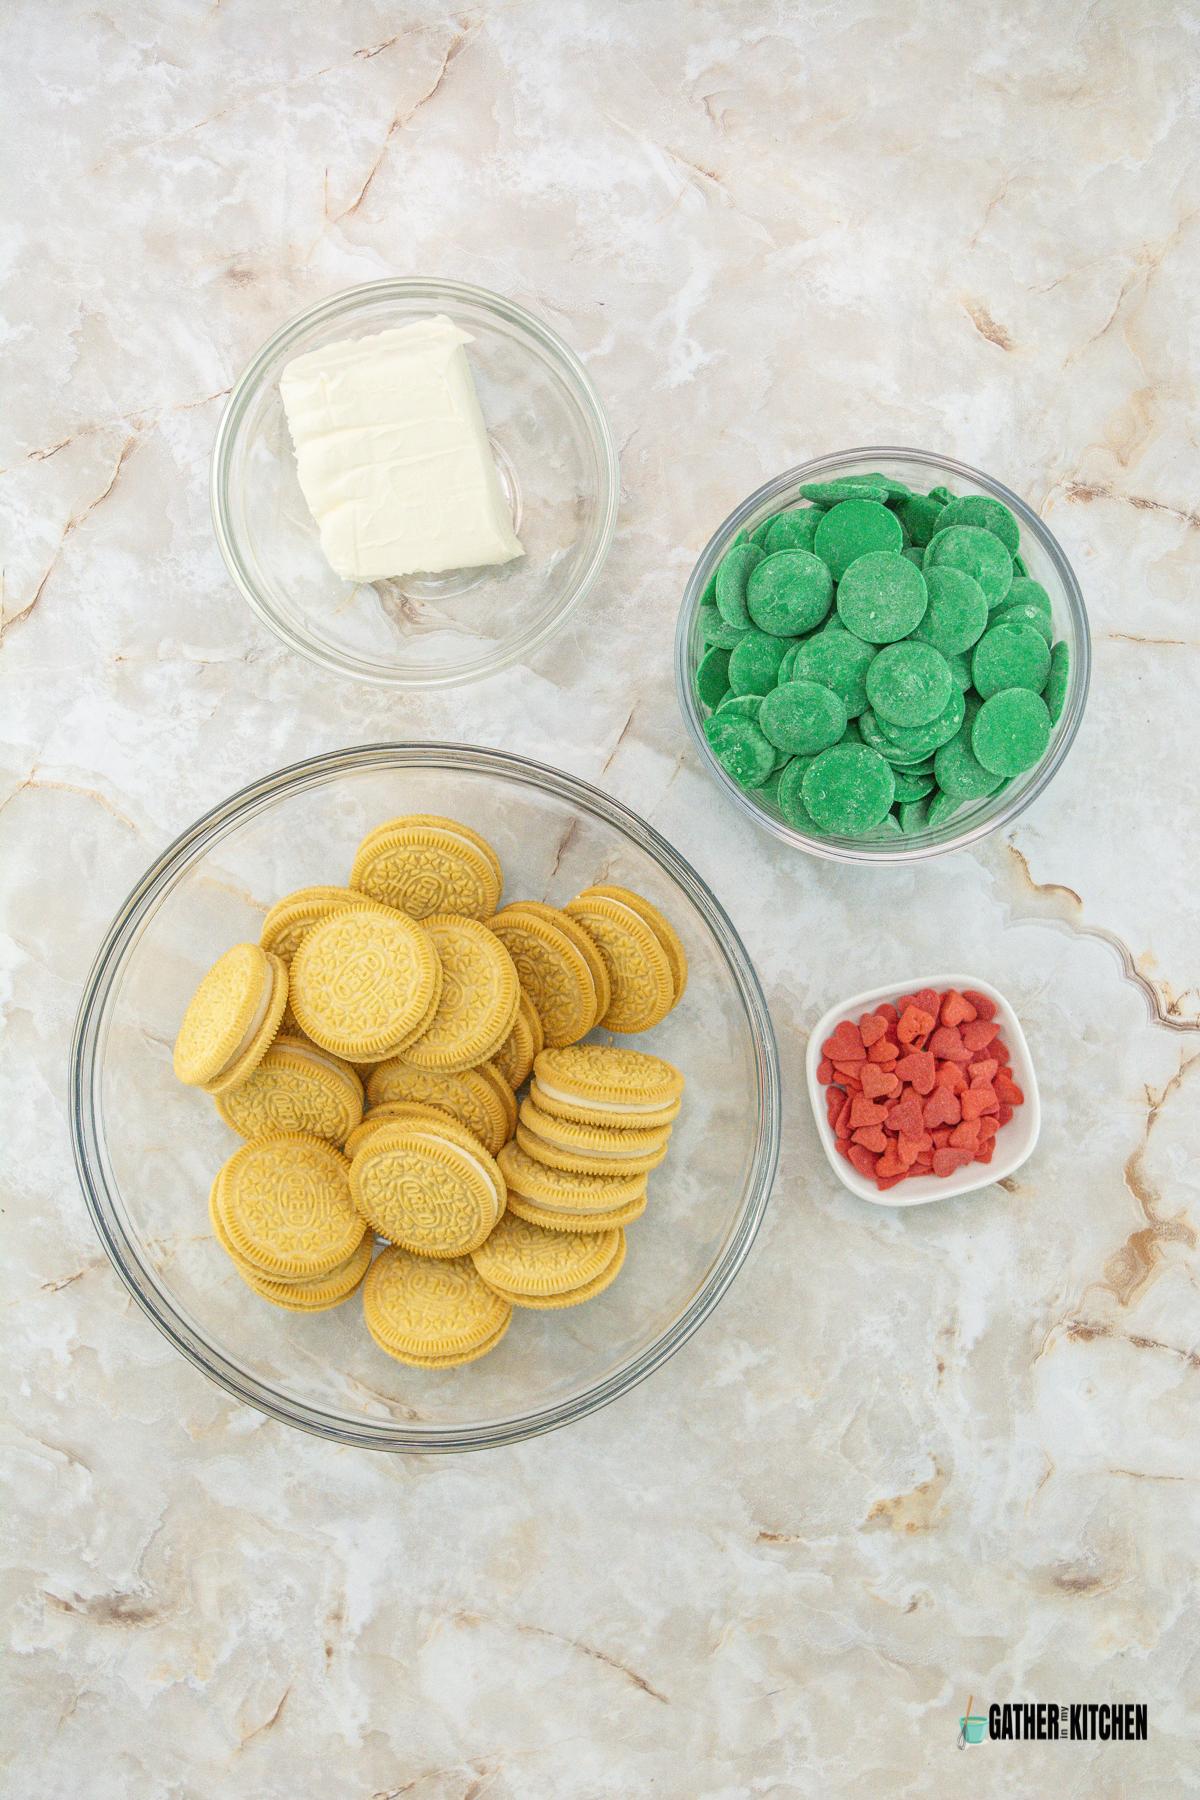 Ingredients: golden Oreos, cream cheese, sprinkles, and green candy melts.